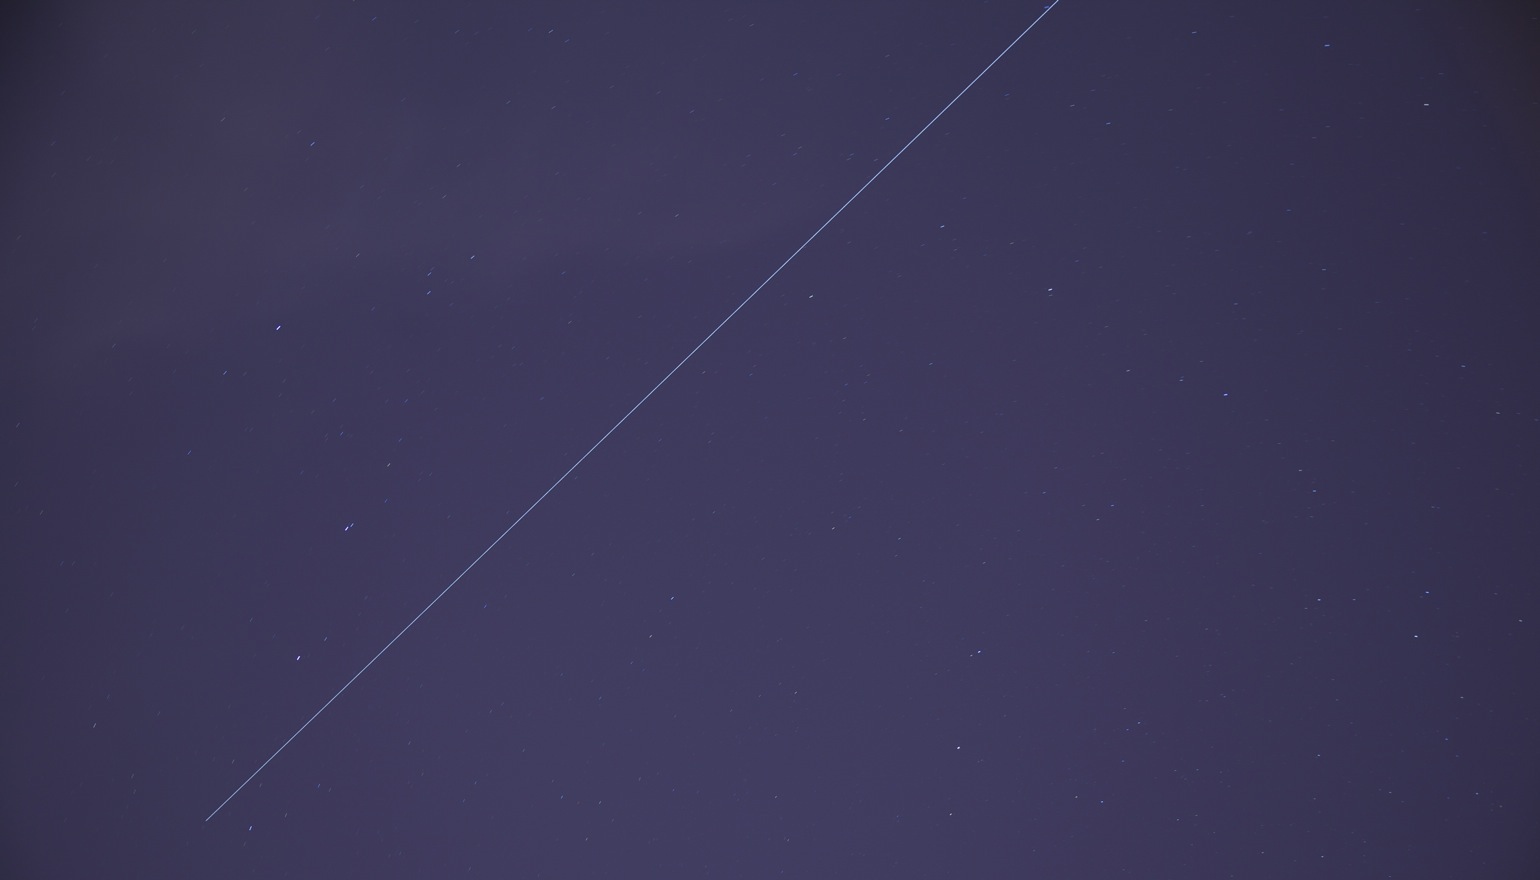 ISS on the 13th of June, 1